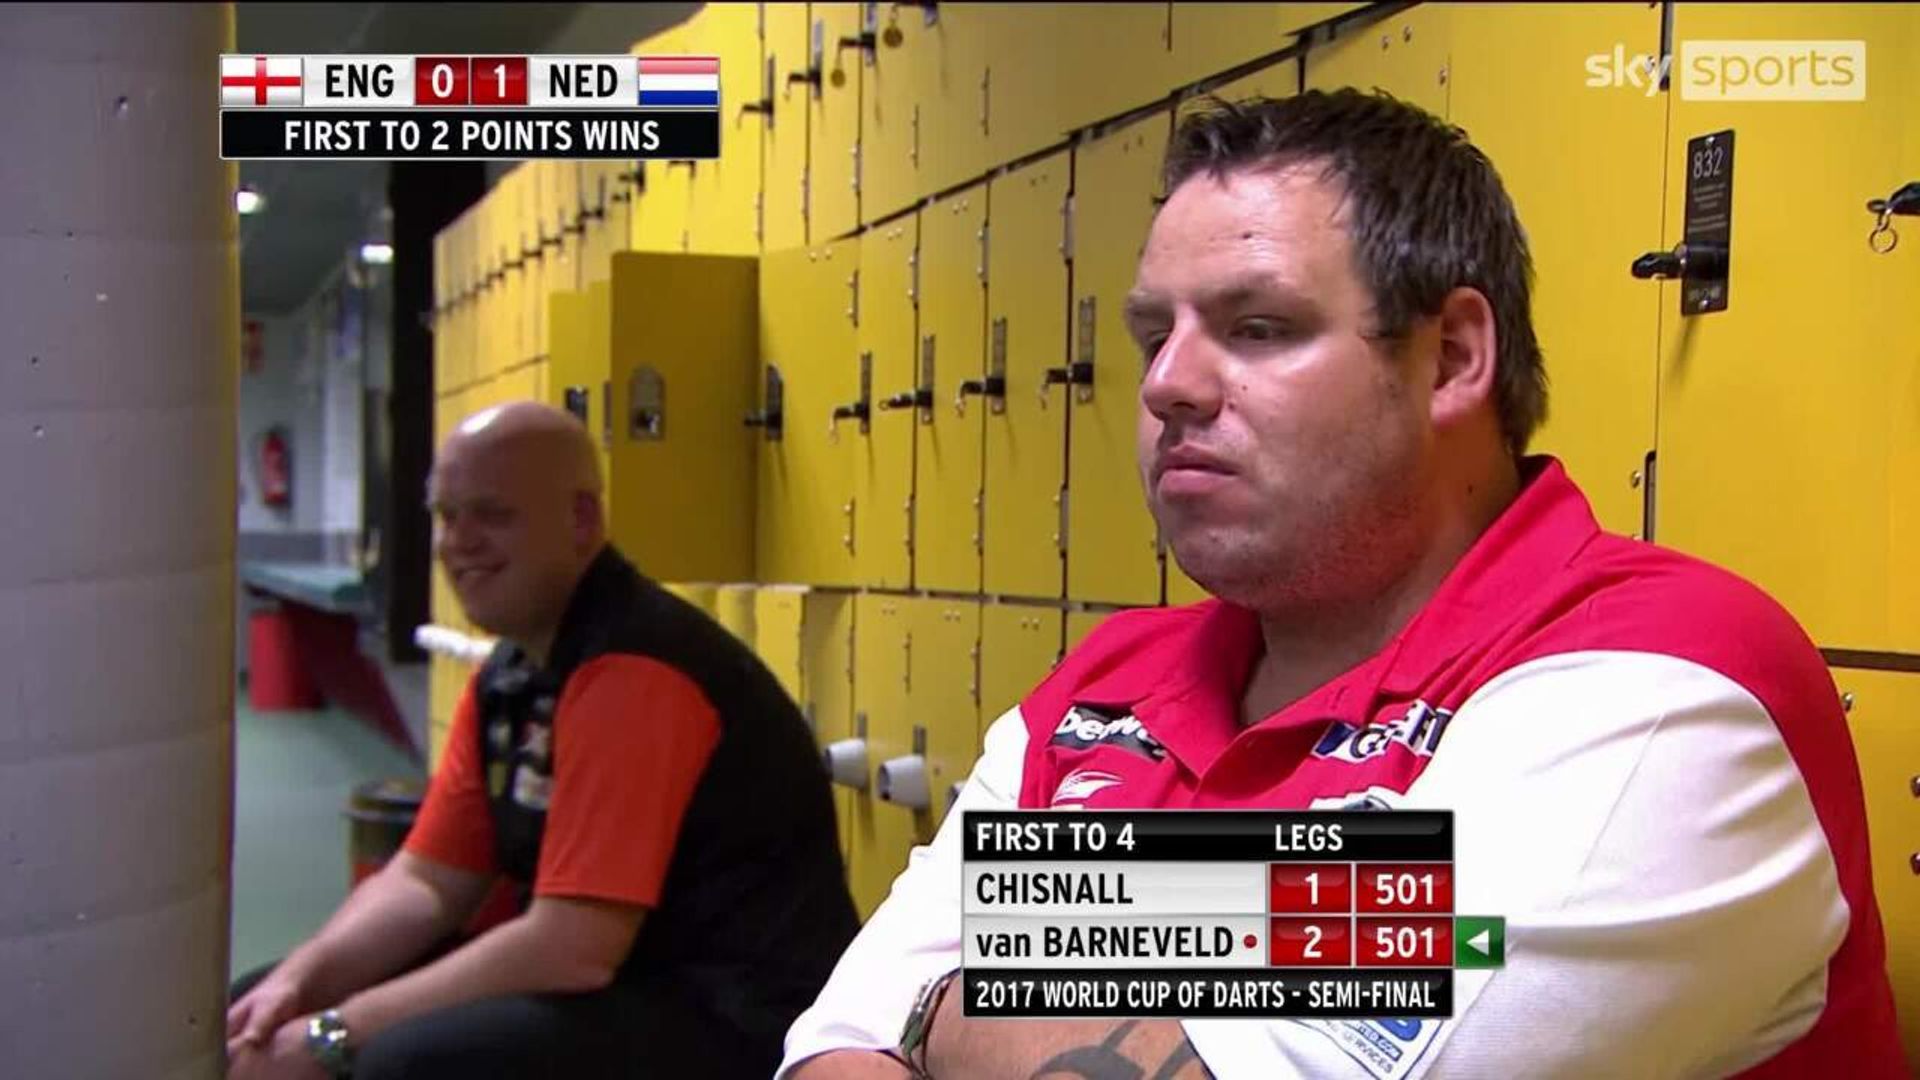 World Cup memories: MVG laughs at Lewis' anguish backstage